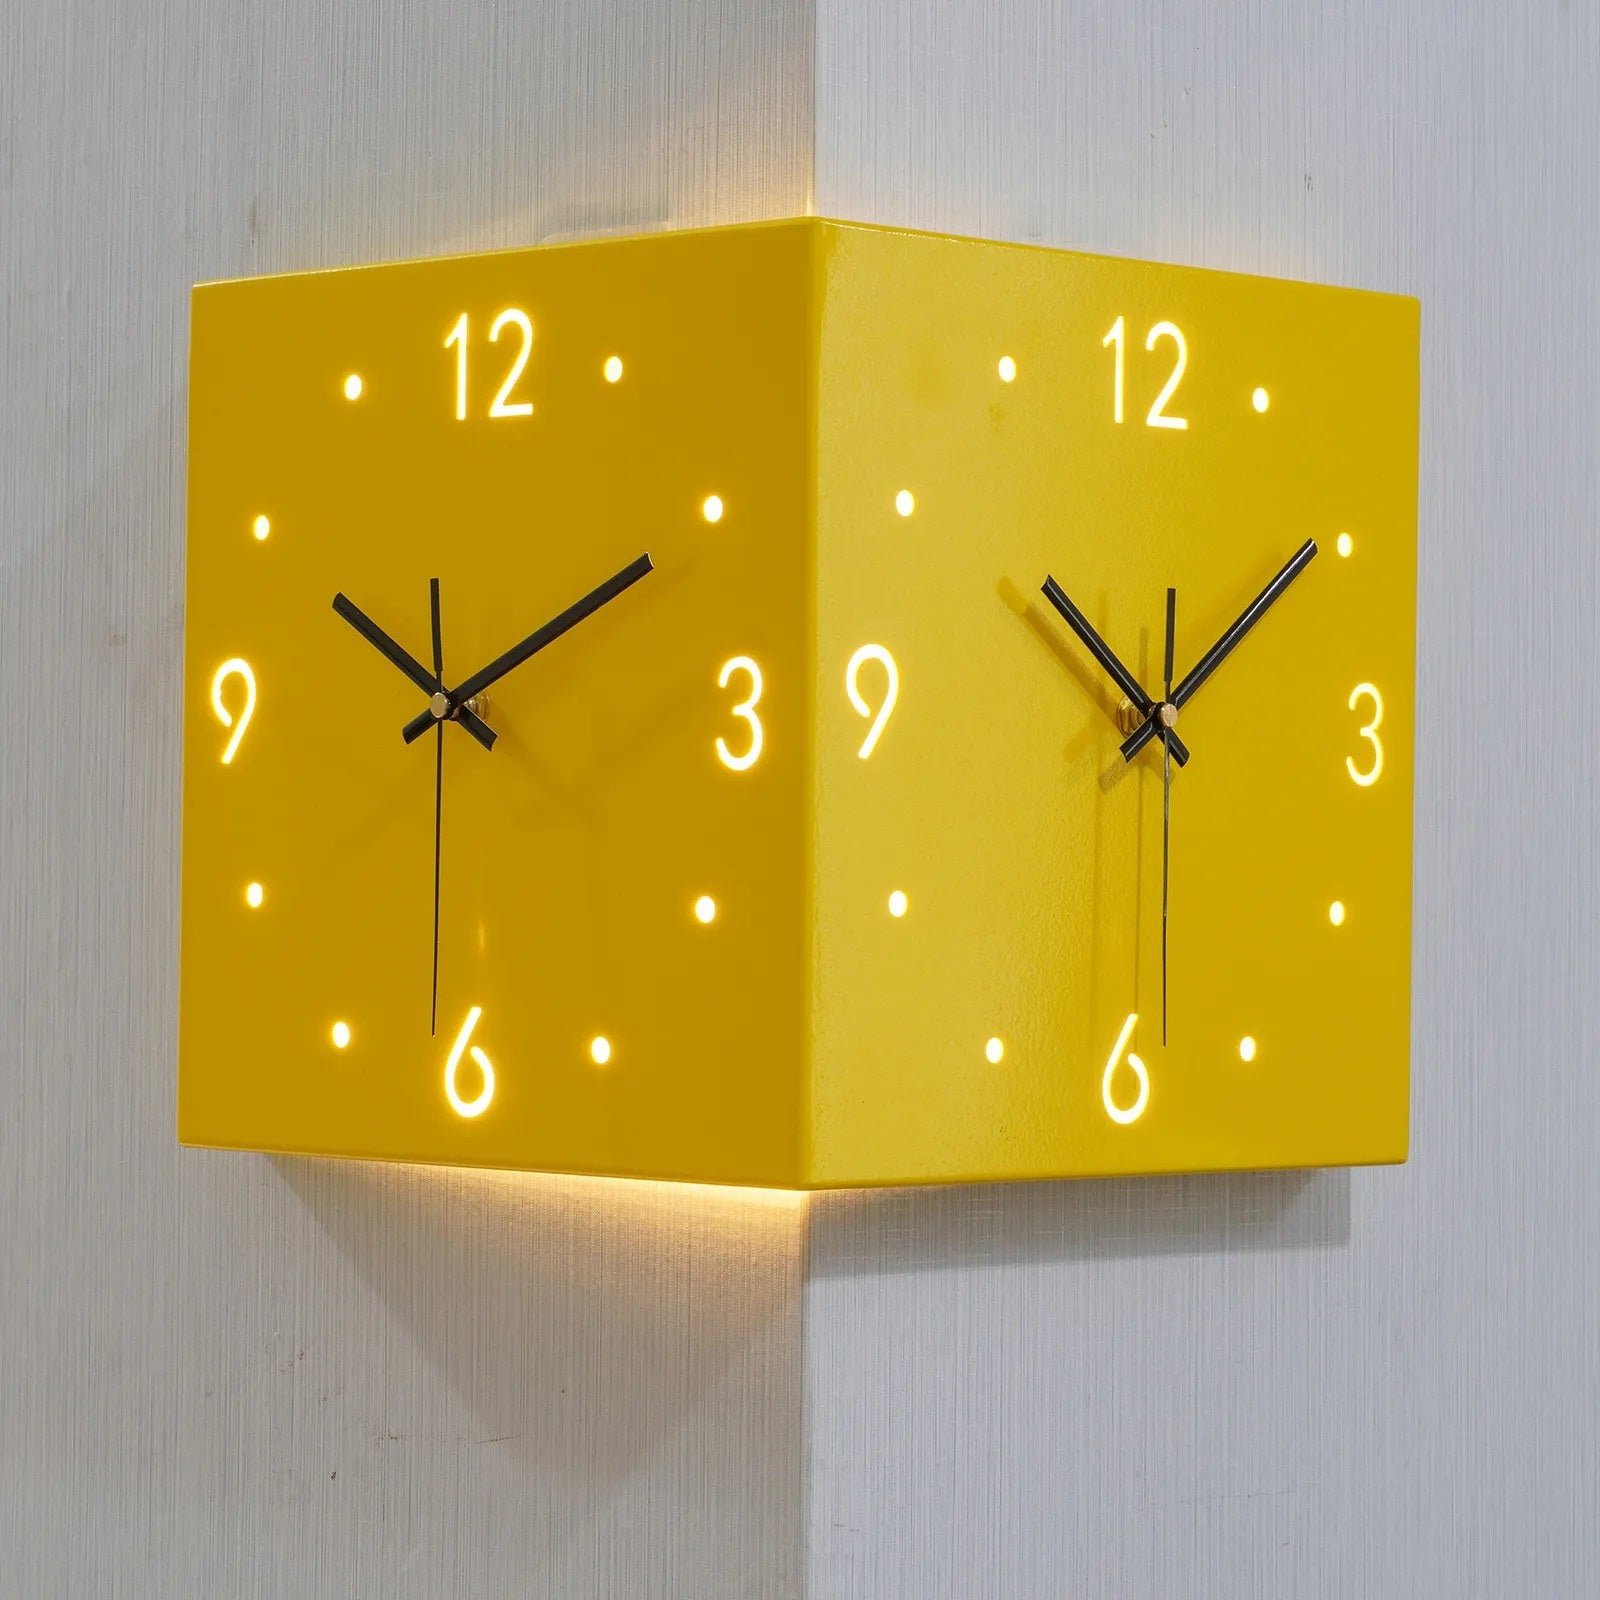 Corner Wall Clock Double Face LED Large Wall Clocks Square Digital Wall Decor Table Mute Clocks Living Room Decoration Ins Watch